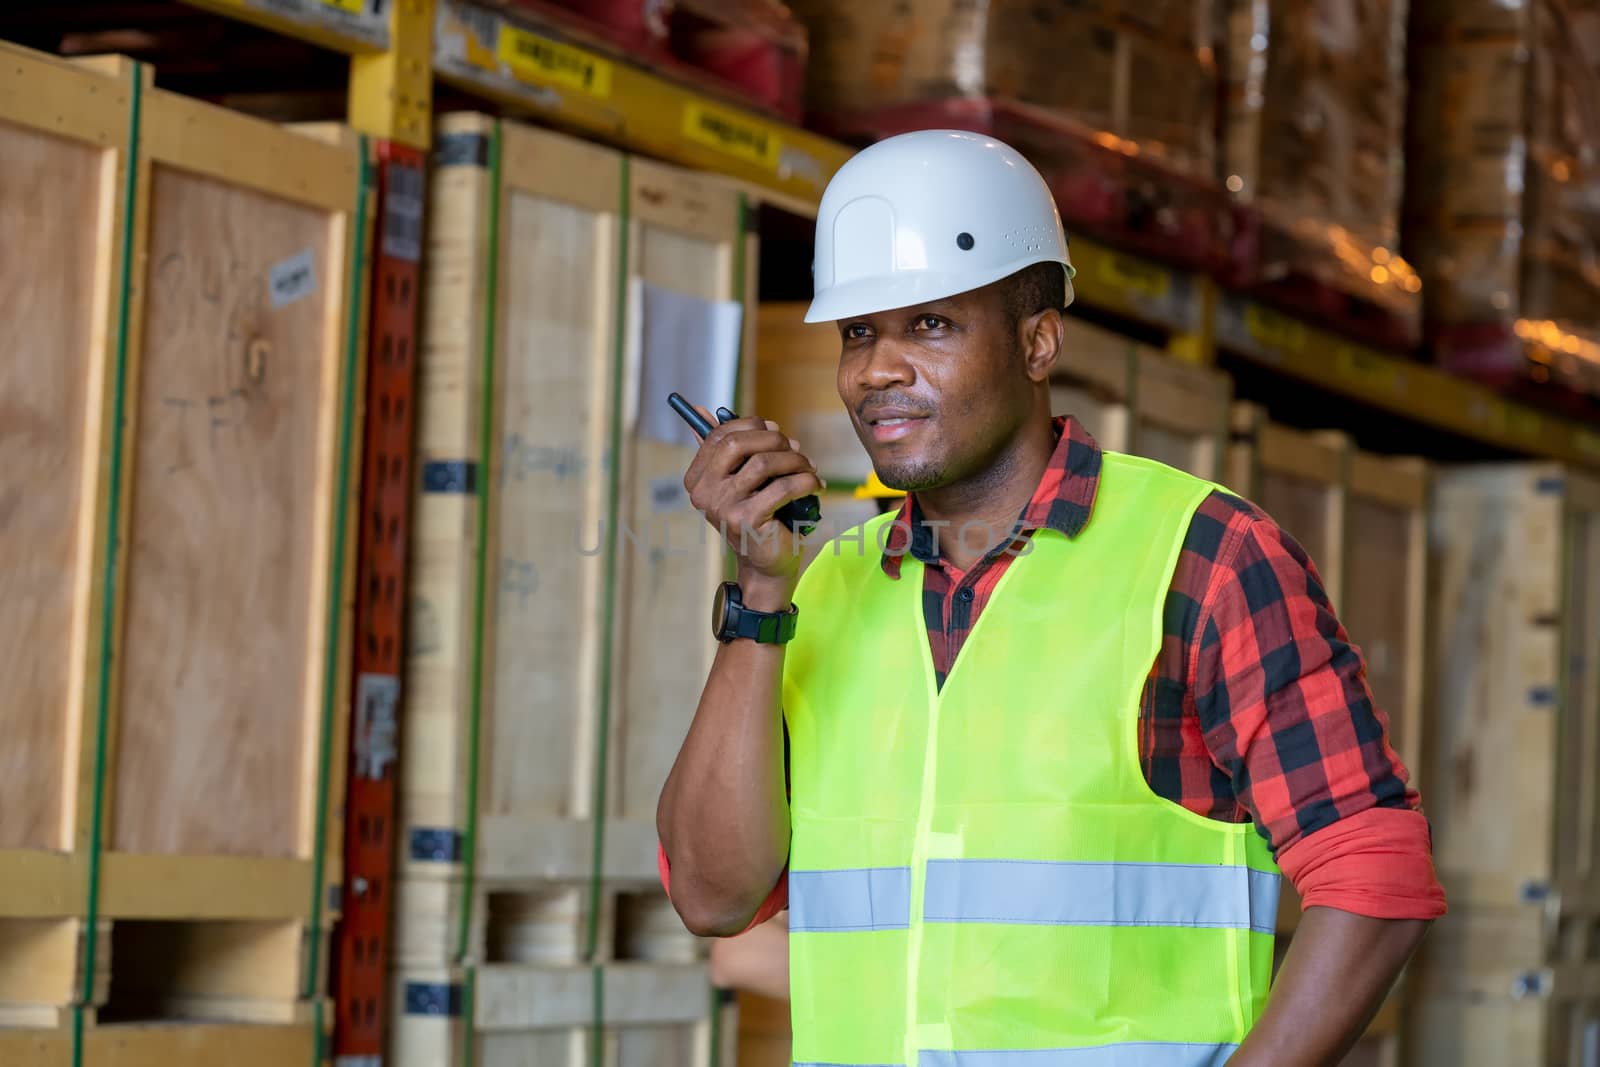 Warehouse worker using handheld radio receiver for communication by Visoot